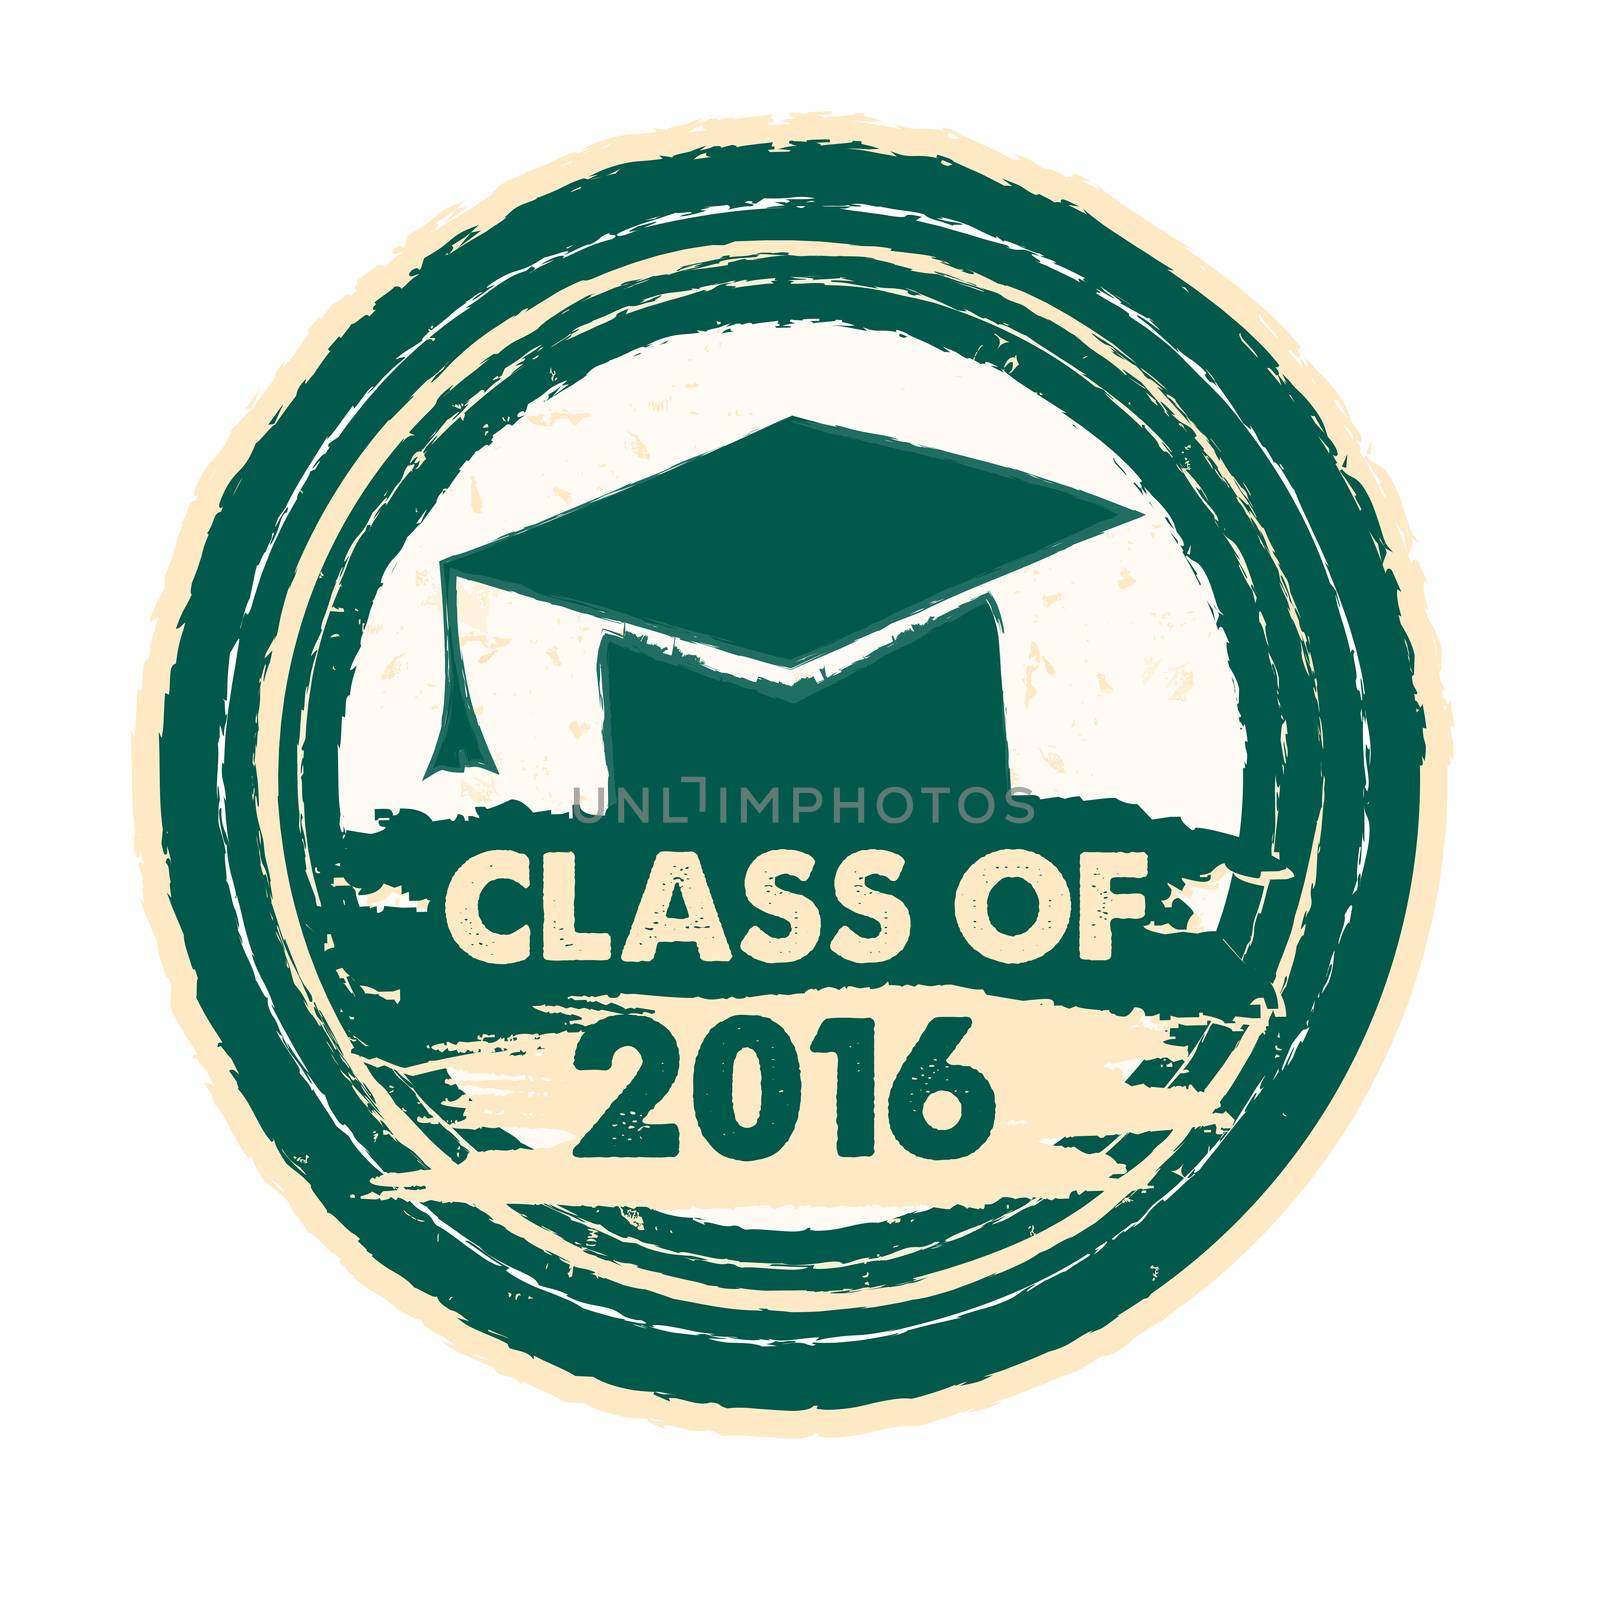 class of 2016 text with graduate cap with tassel - mortarboard, graduate education concept, drawn circle label